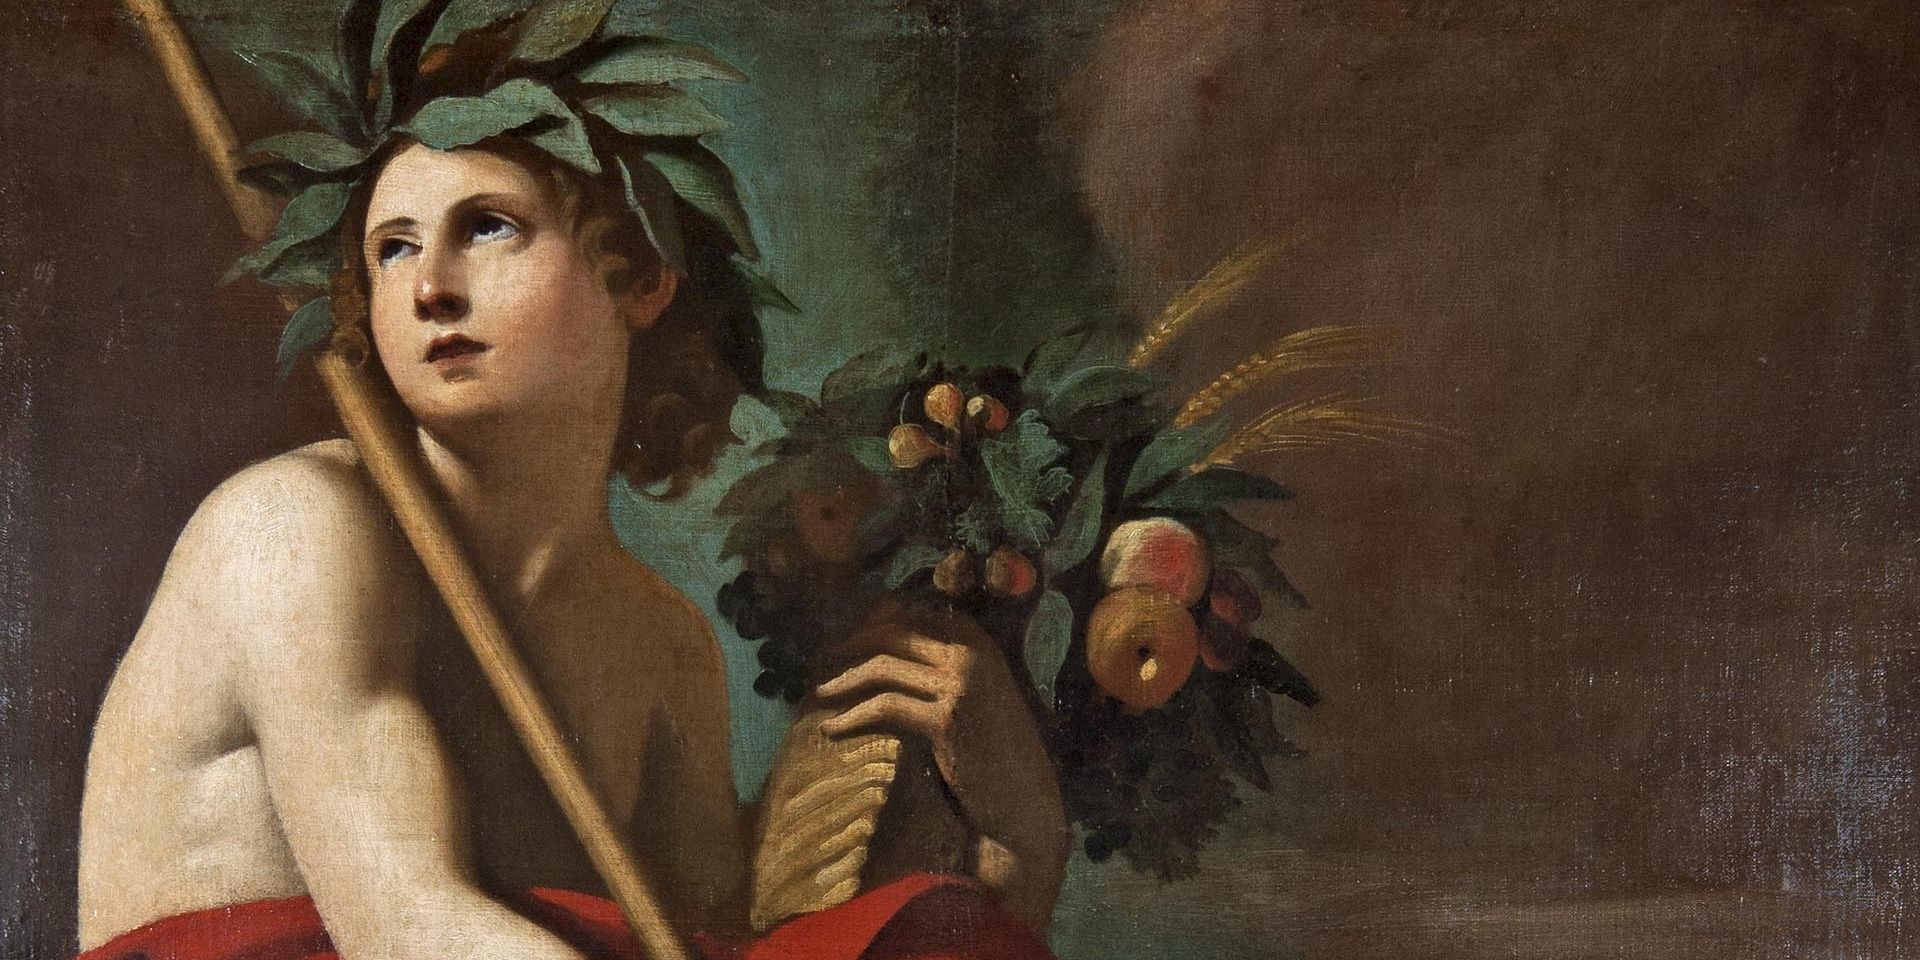 A painting of Dionysus